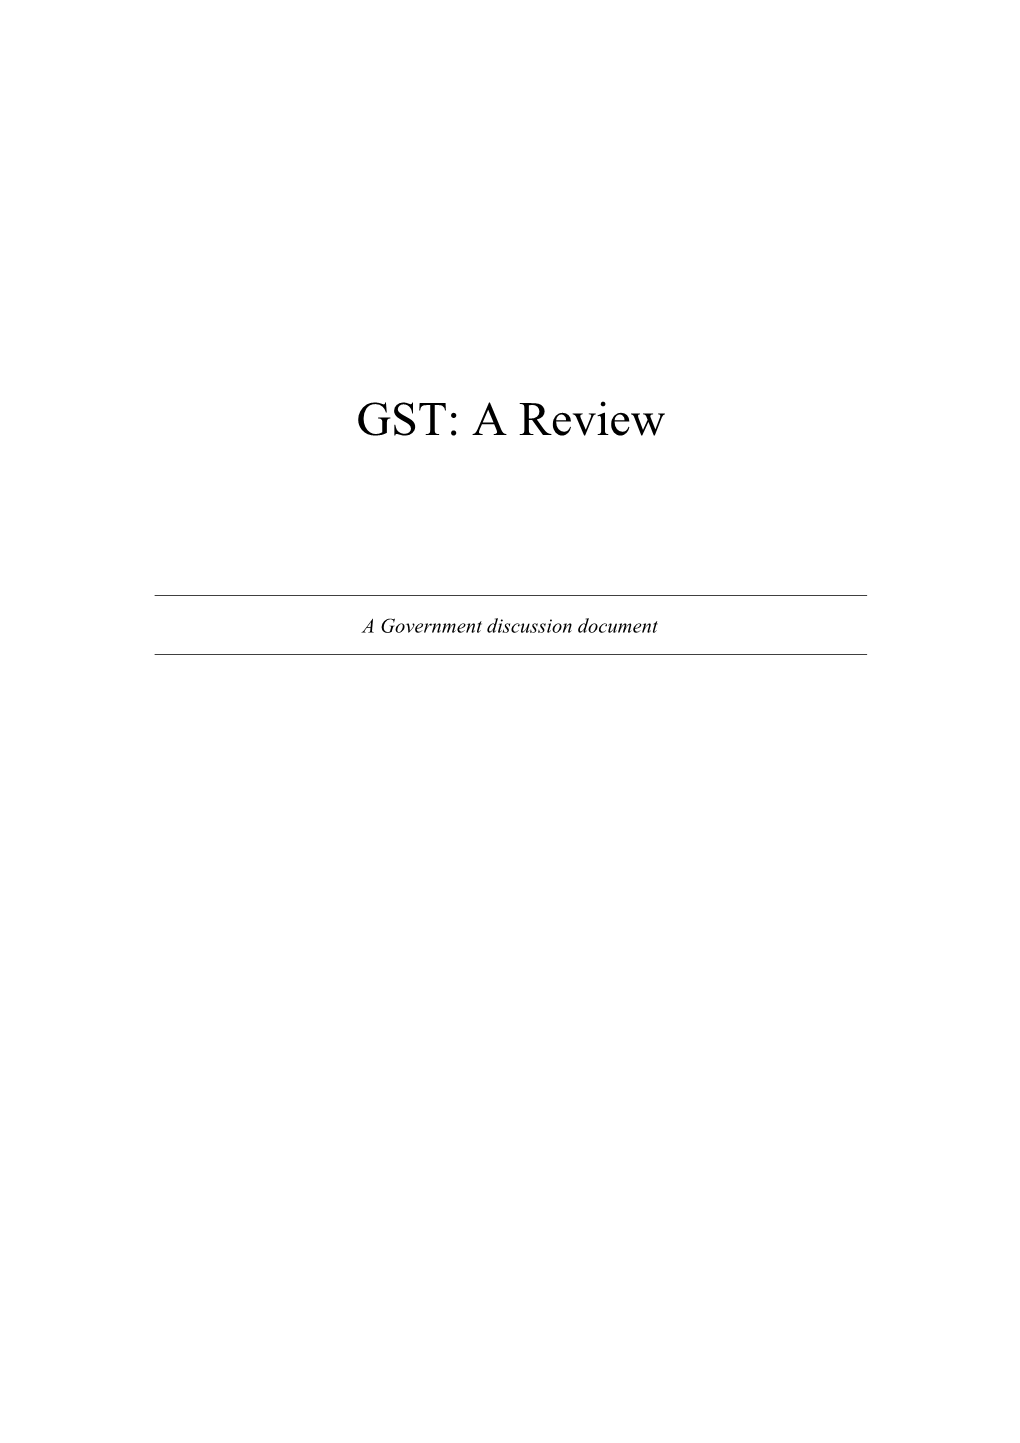 GST: a Review. a Tax Policy Discussion Document